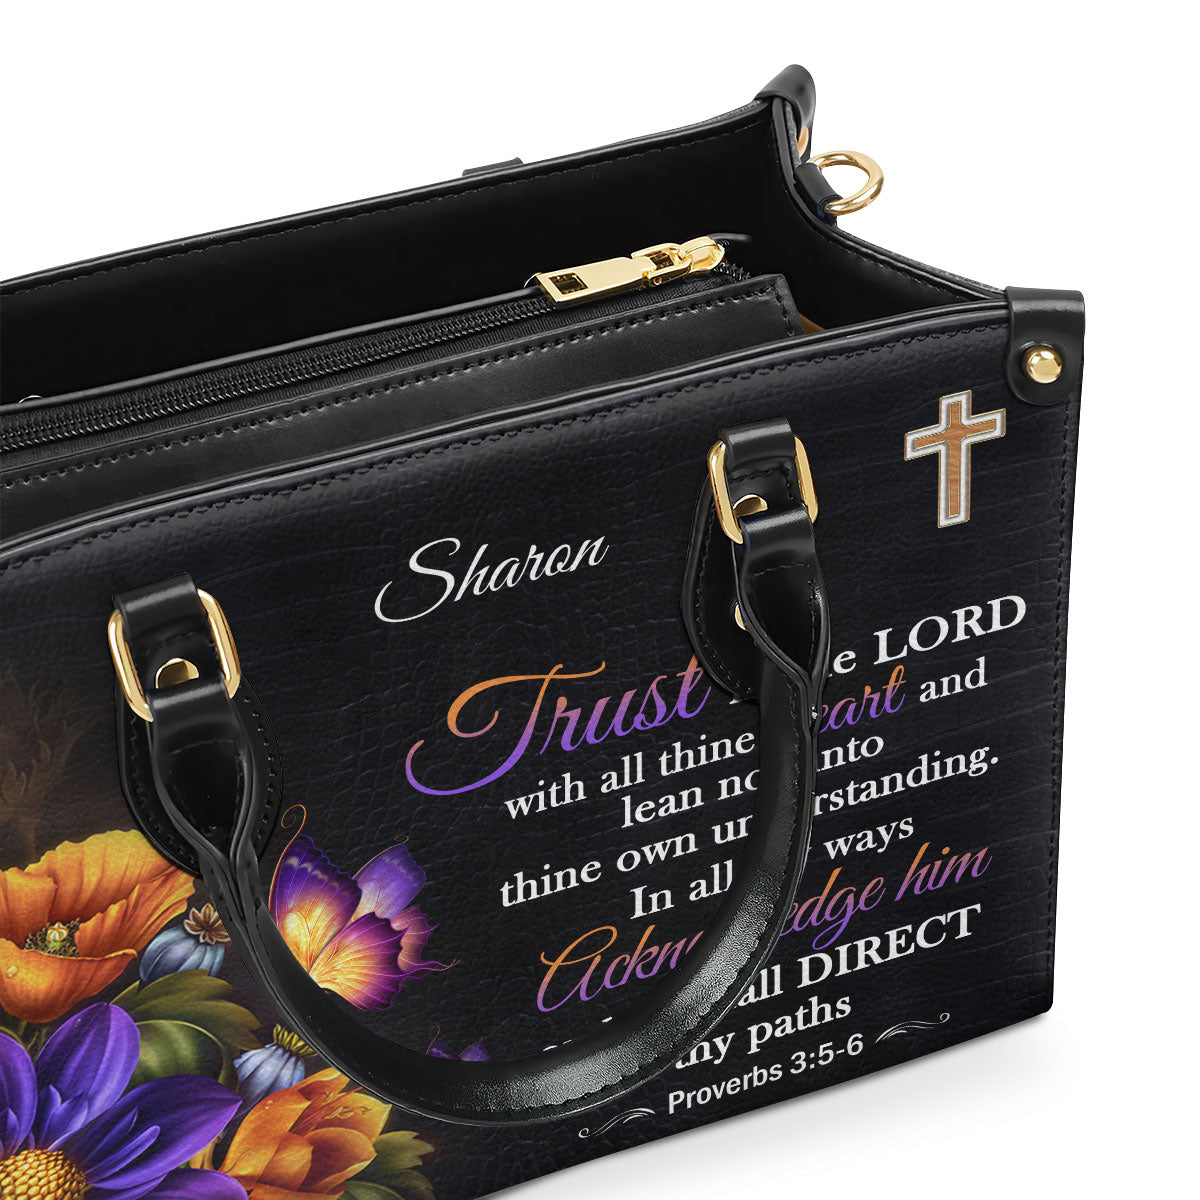 Jesuspirit Personalized Leather Handbag | Bible Bag With Handle | Gift For Christian Women H22